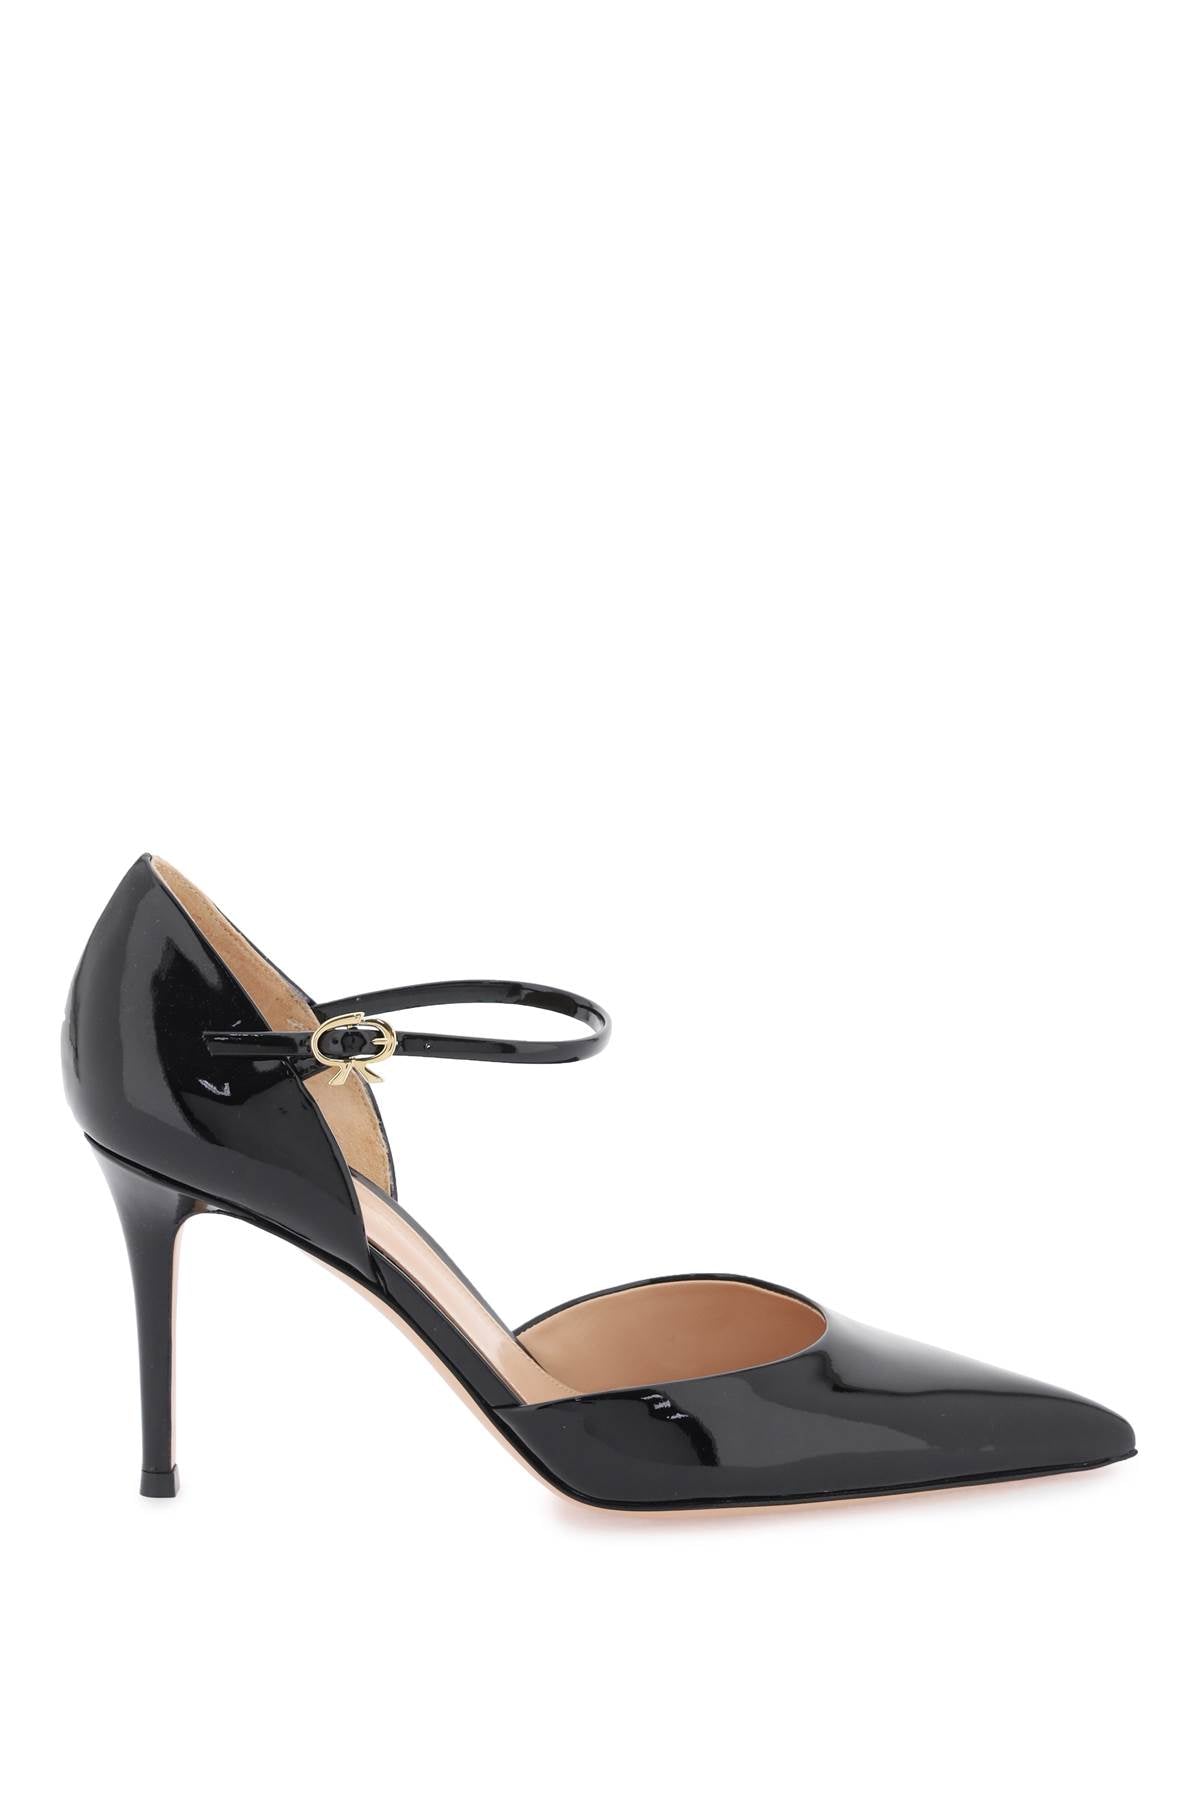 Gianvito rossi patent leather pumps-women > shoes > pumps-Gianvito Rossi-Urbanheer